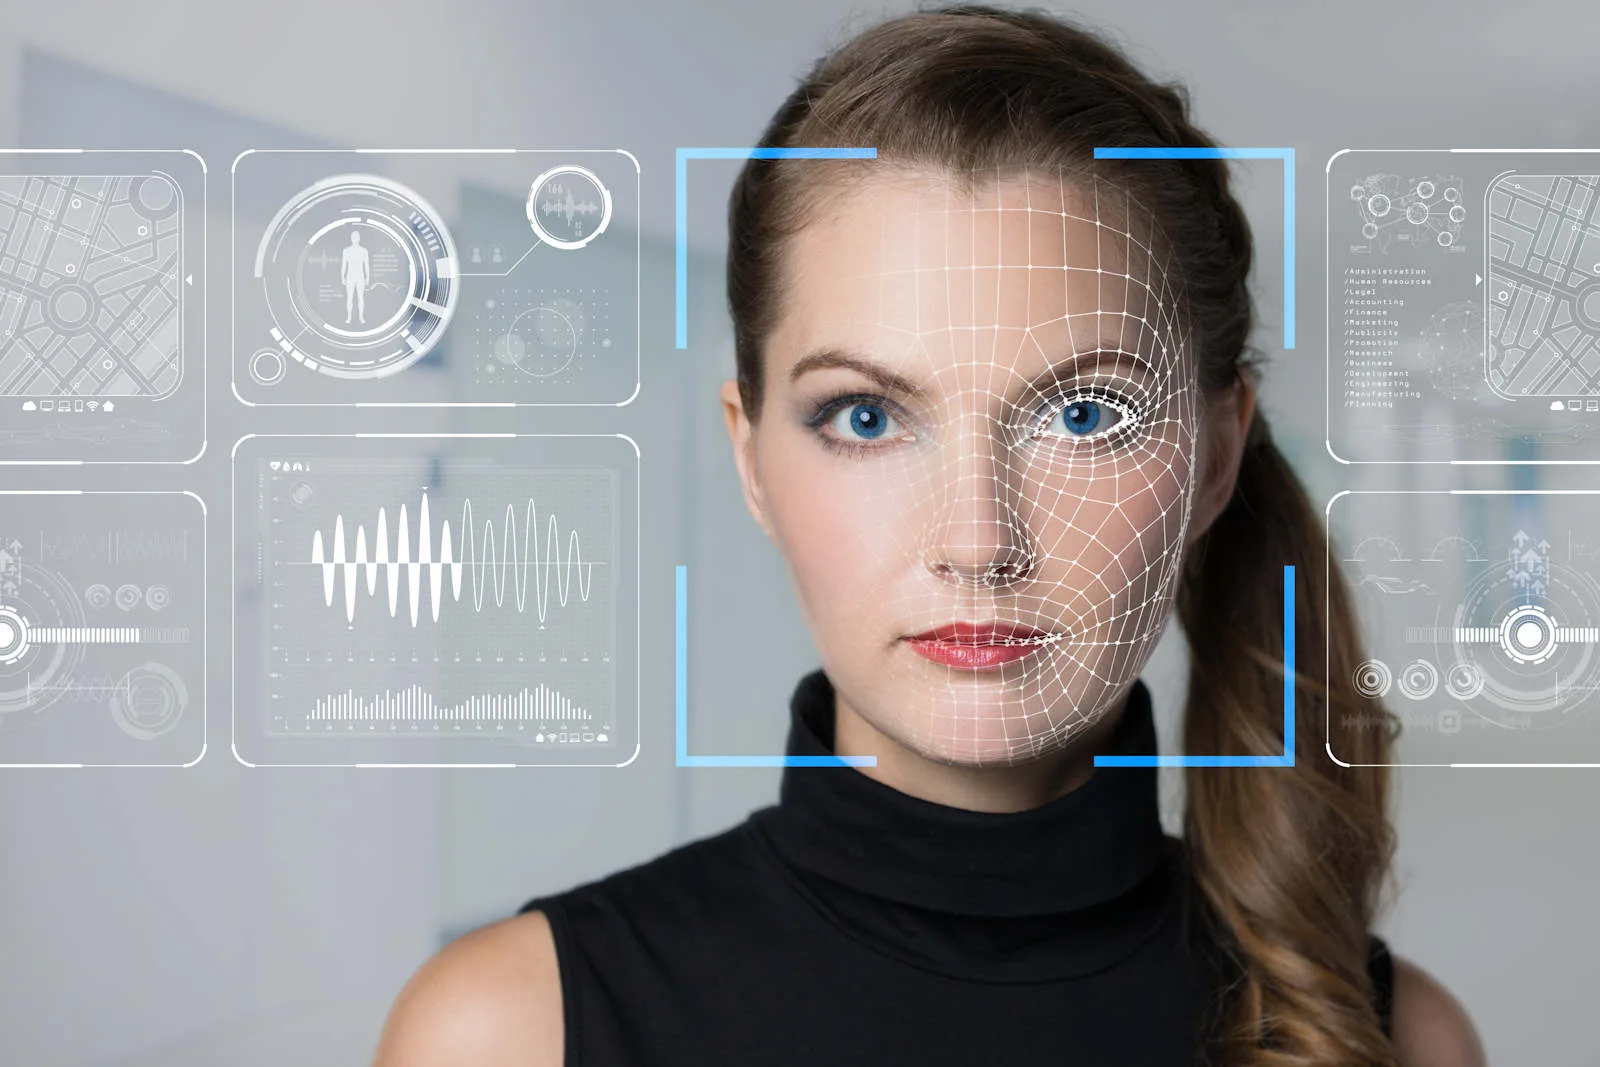 facial recognition of an employee